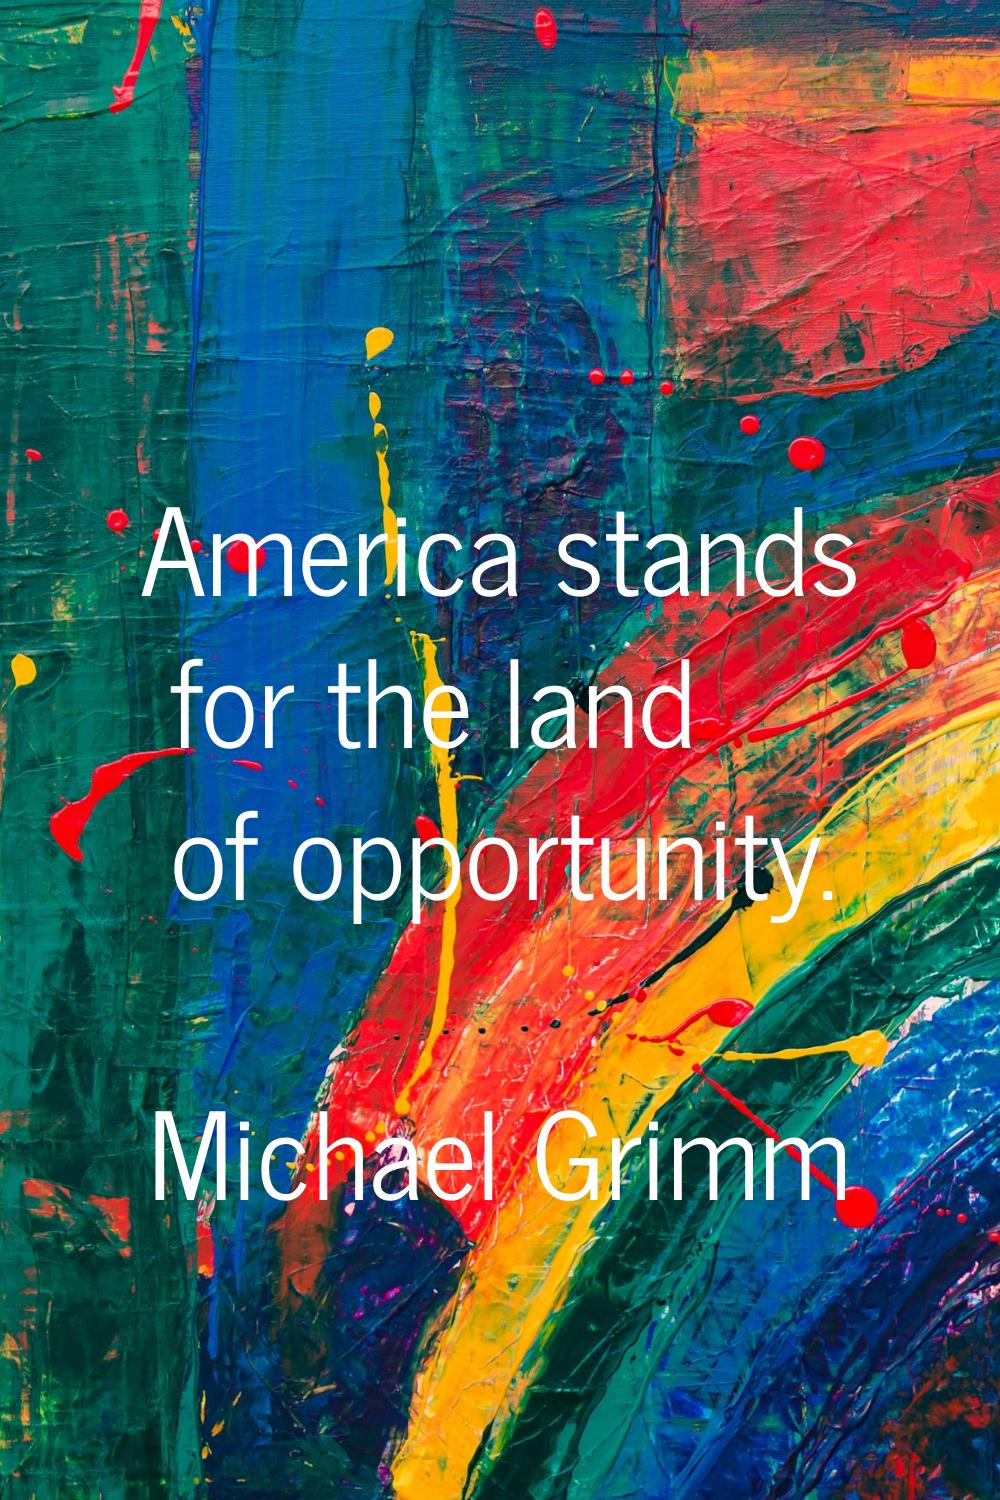 America stands for the land of opportunity.